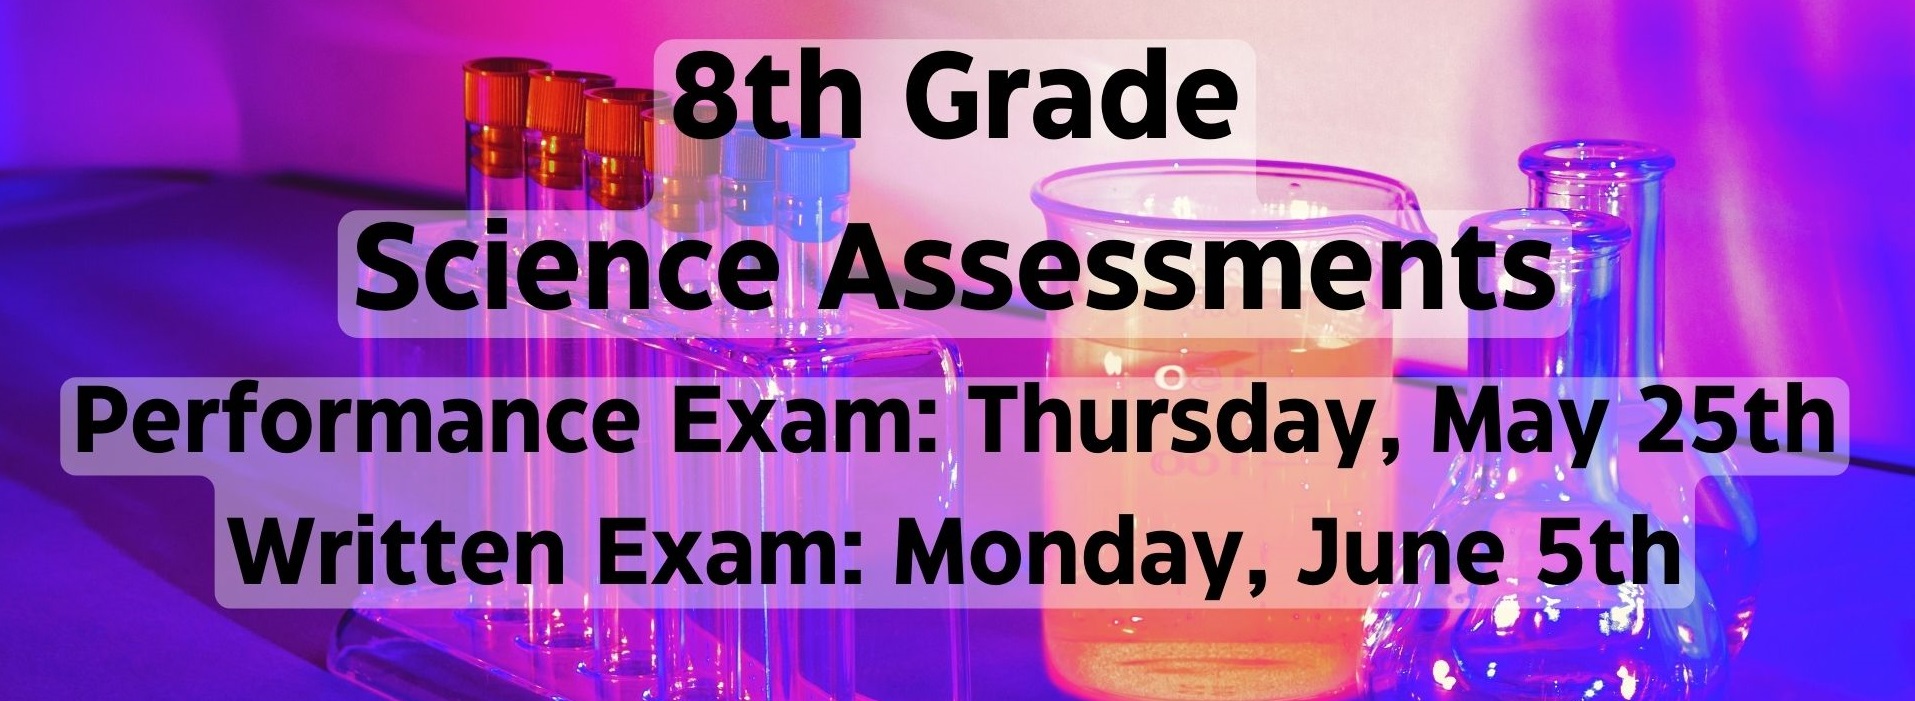 8th Grade Science Assessments - Performance Exam: Thursday, May 25th. Written Exam: Monday, June 5th.